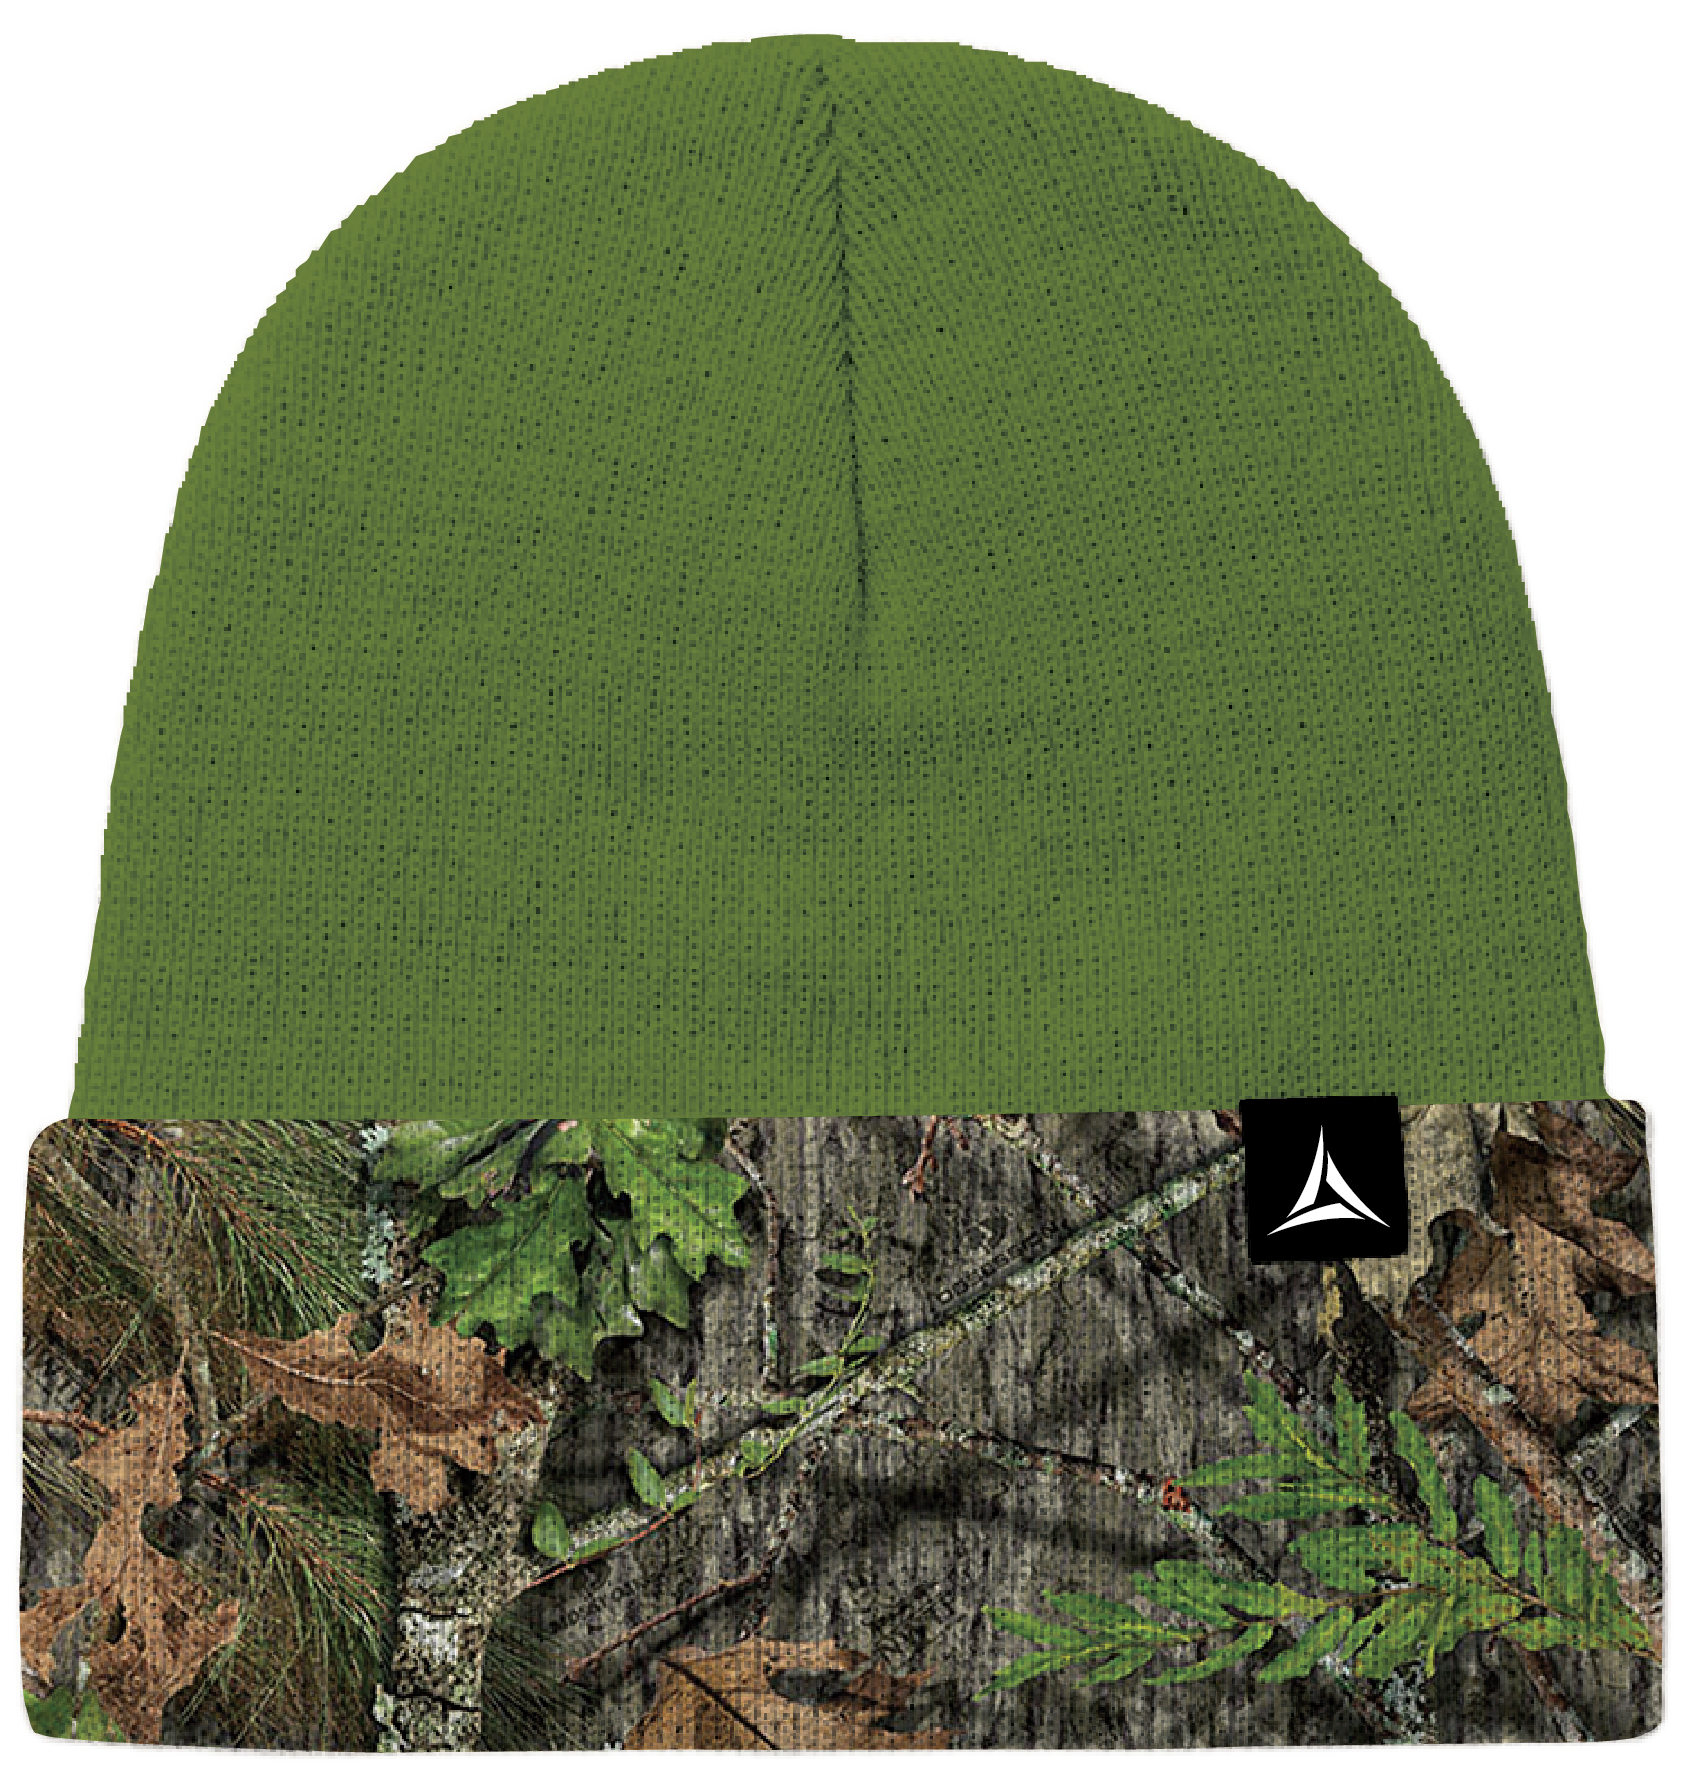 HandCrew MOSSY OAK CAMO OBSESSION WINTER HAT at